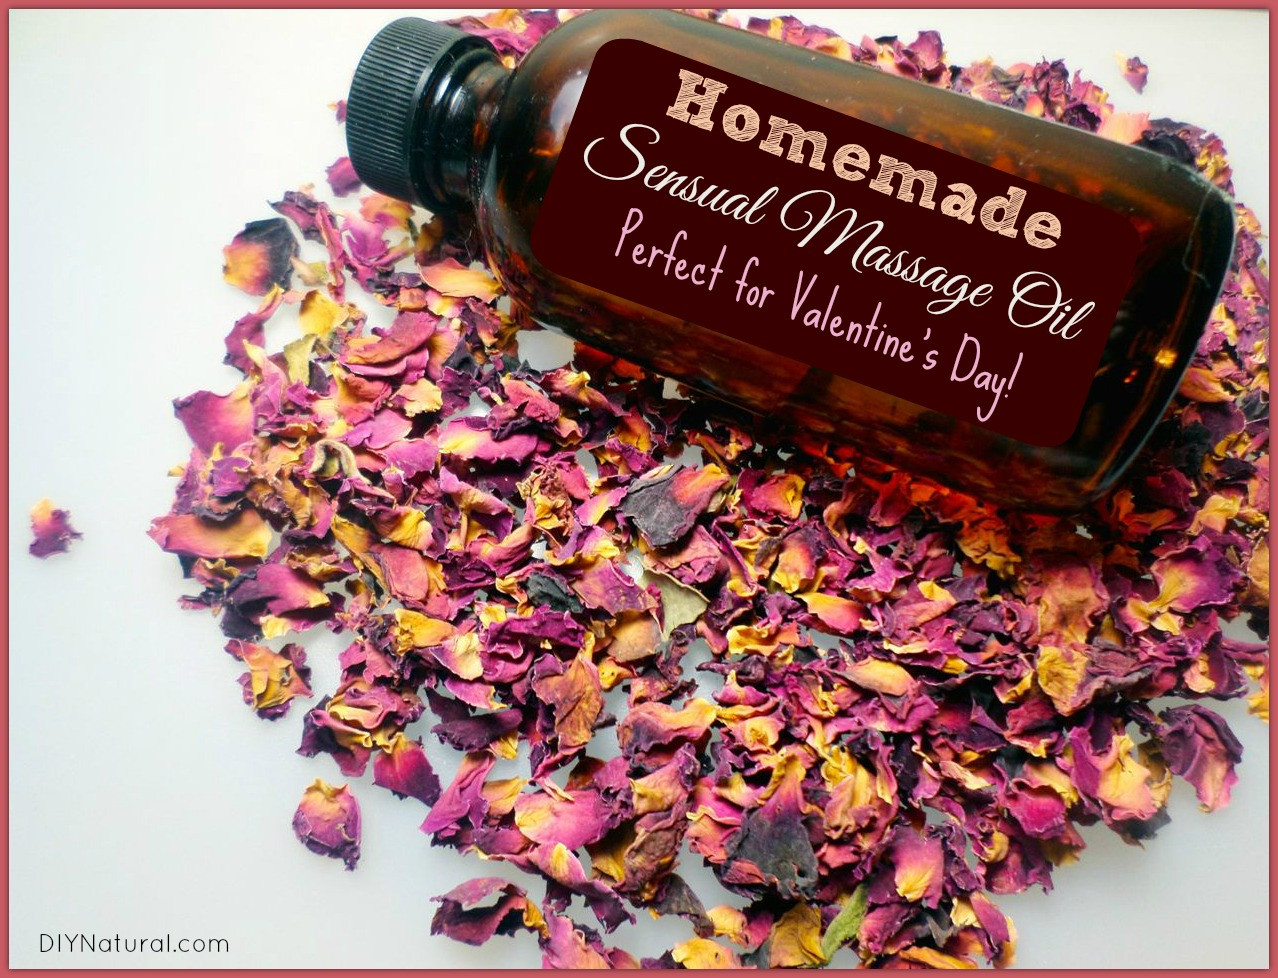 DIY Massage Oil
 Homemade Massage Oil Perfect for Valentine s Day